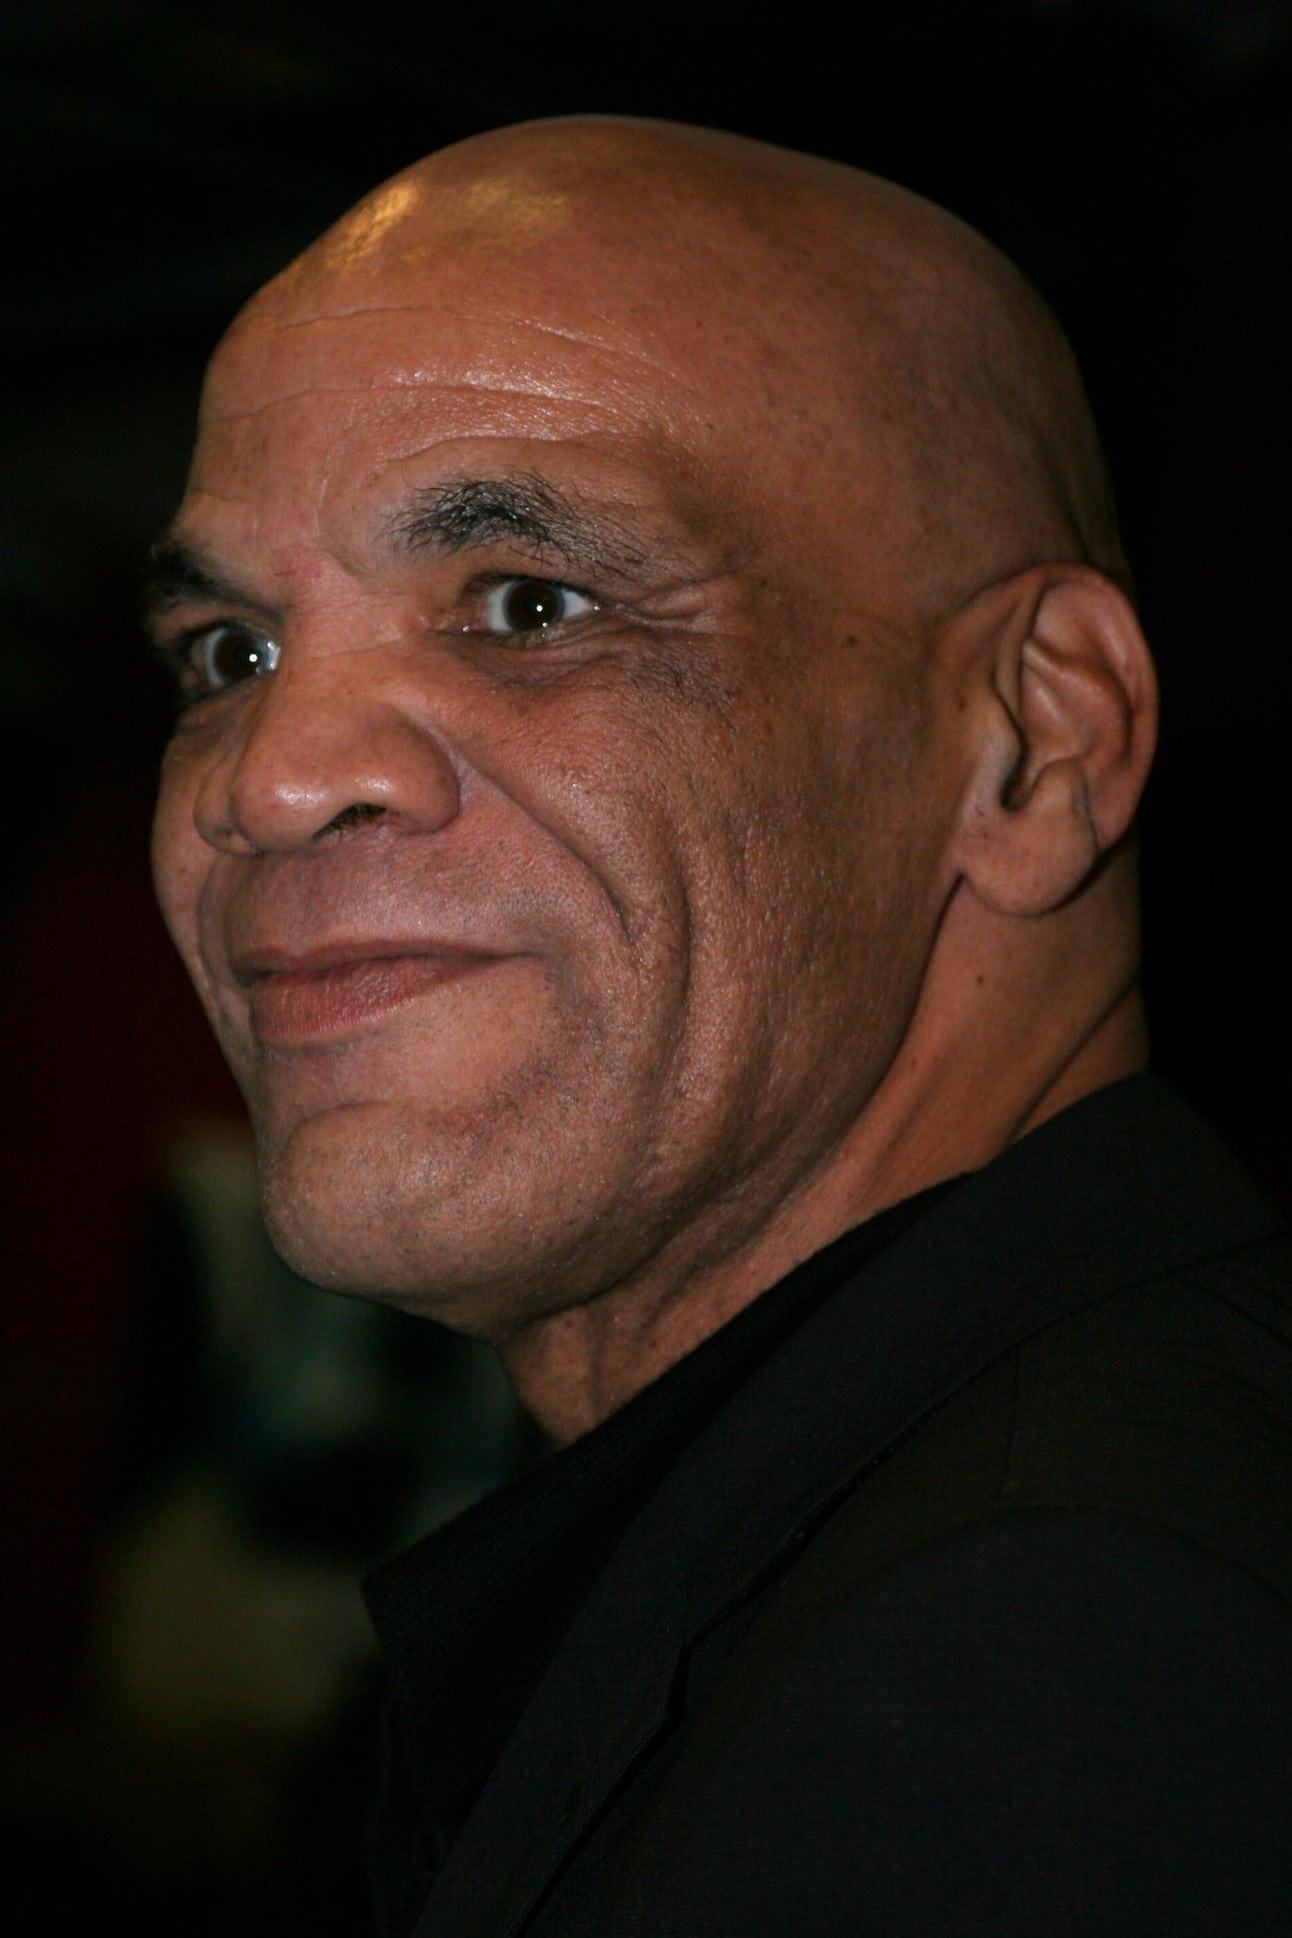 Paul Barber | Thierry